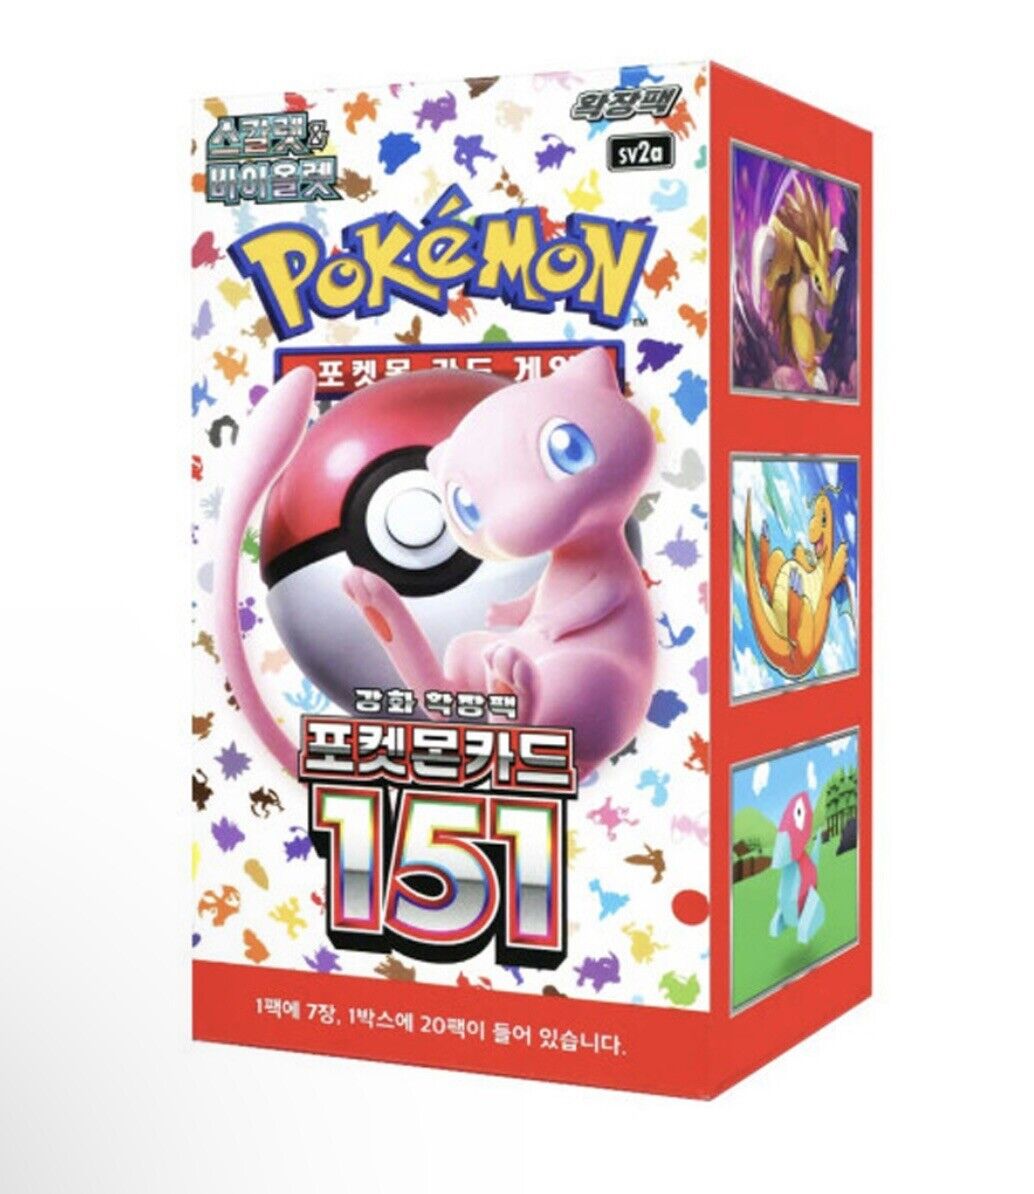  (3 Packs) Pokemon Card Game Japanese 151 SV2a Booster Pack (7  Cards Per Pack) : Toys & Games